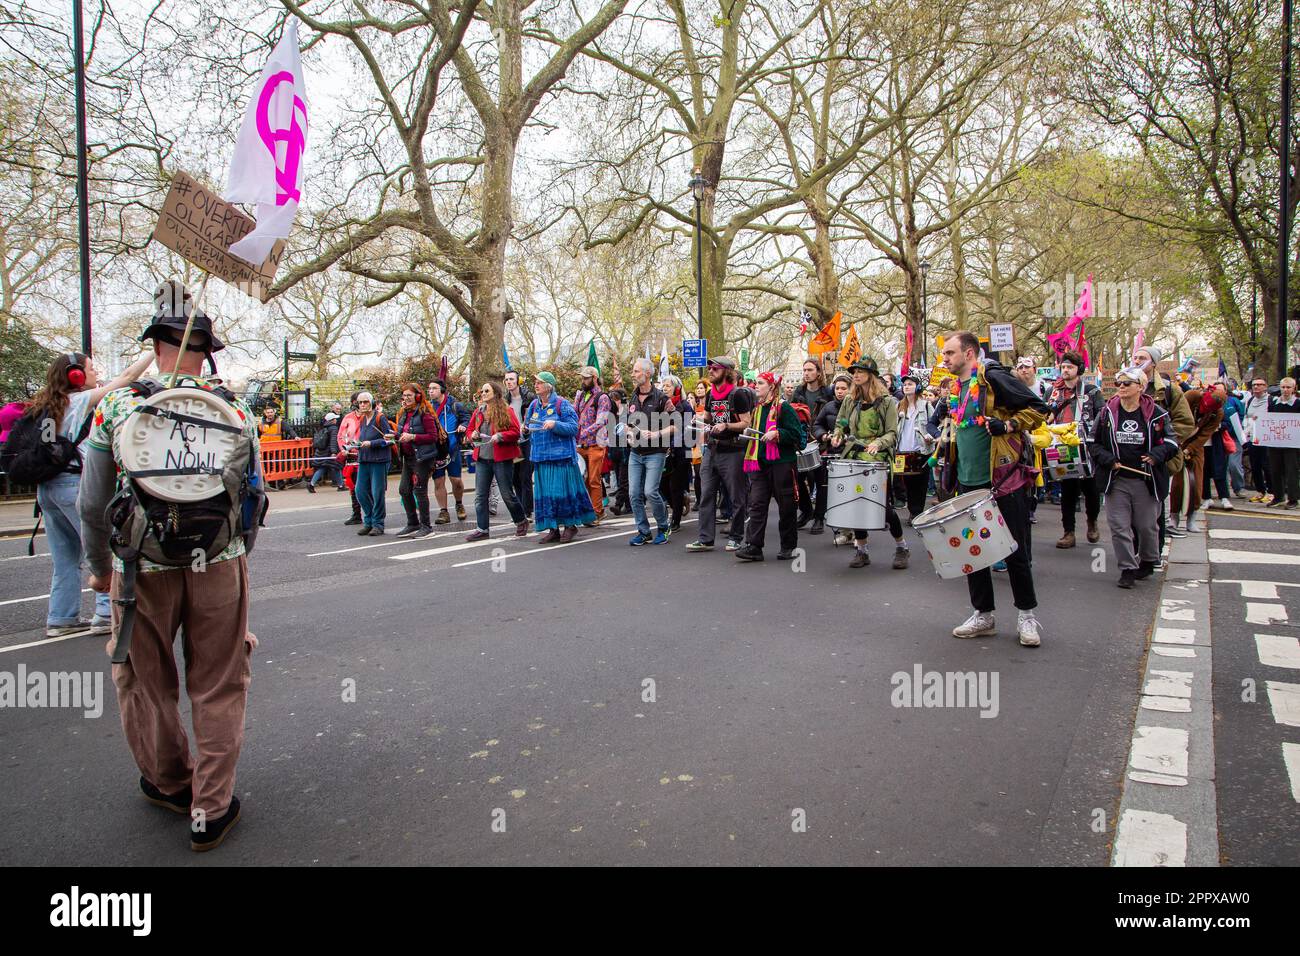 Unite to Survive at ‘The Big One’ -  Earth Day. Extinction Rebellion (XR) march on Parliament Square for biodiversity - 22 April Stock Photo